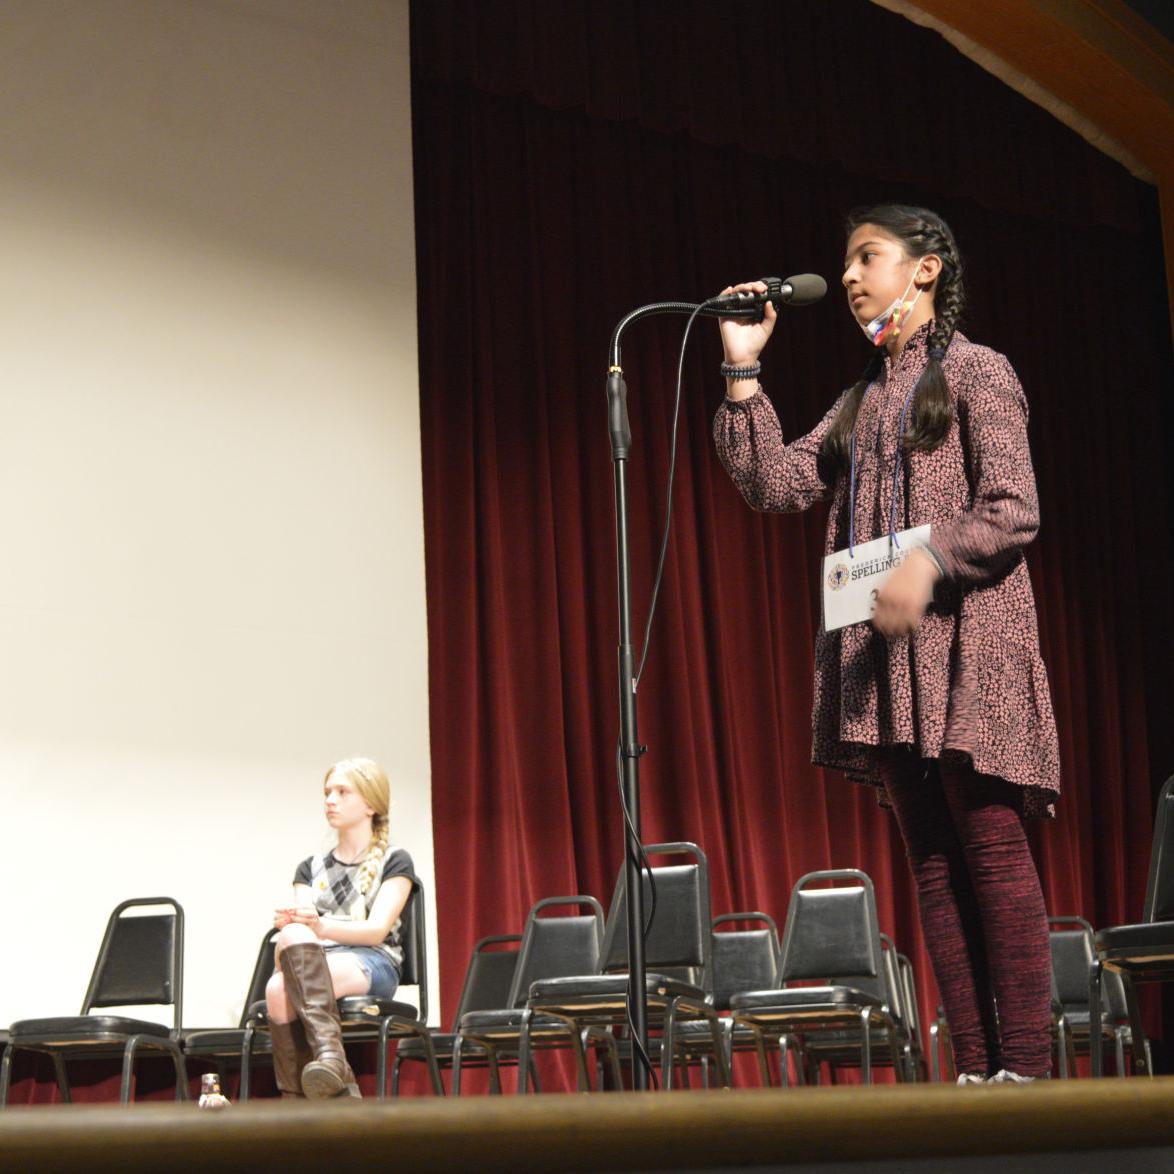 AROUND TOWN: Spelling Bee goes down the wire